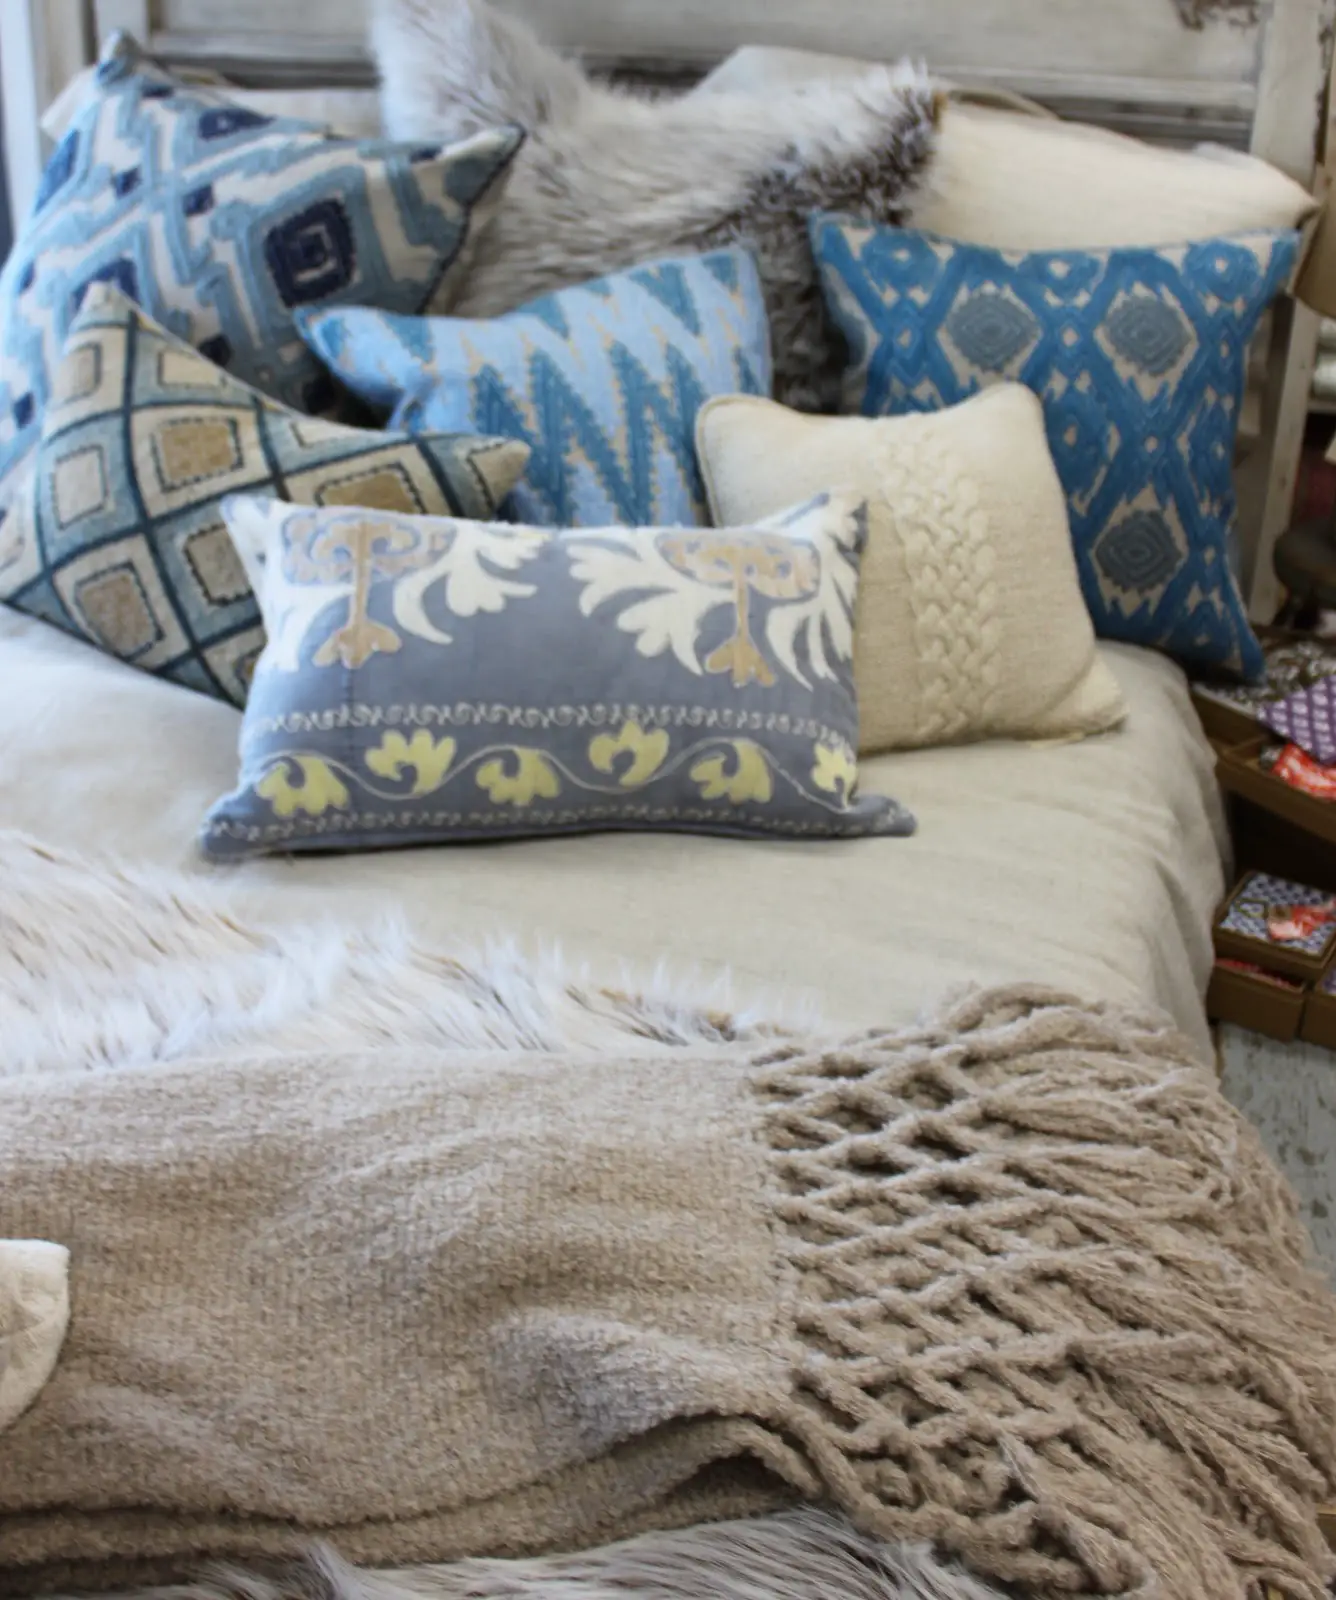 Blue Springs Home Blog: Fall Into Bed with Bella Notte Linens!